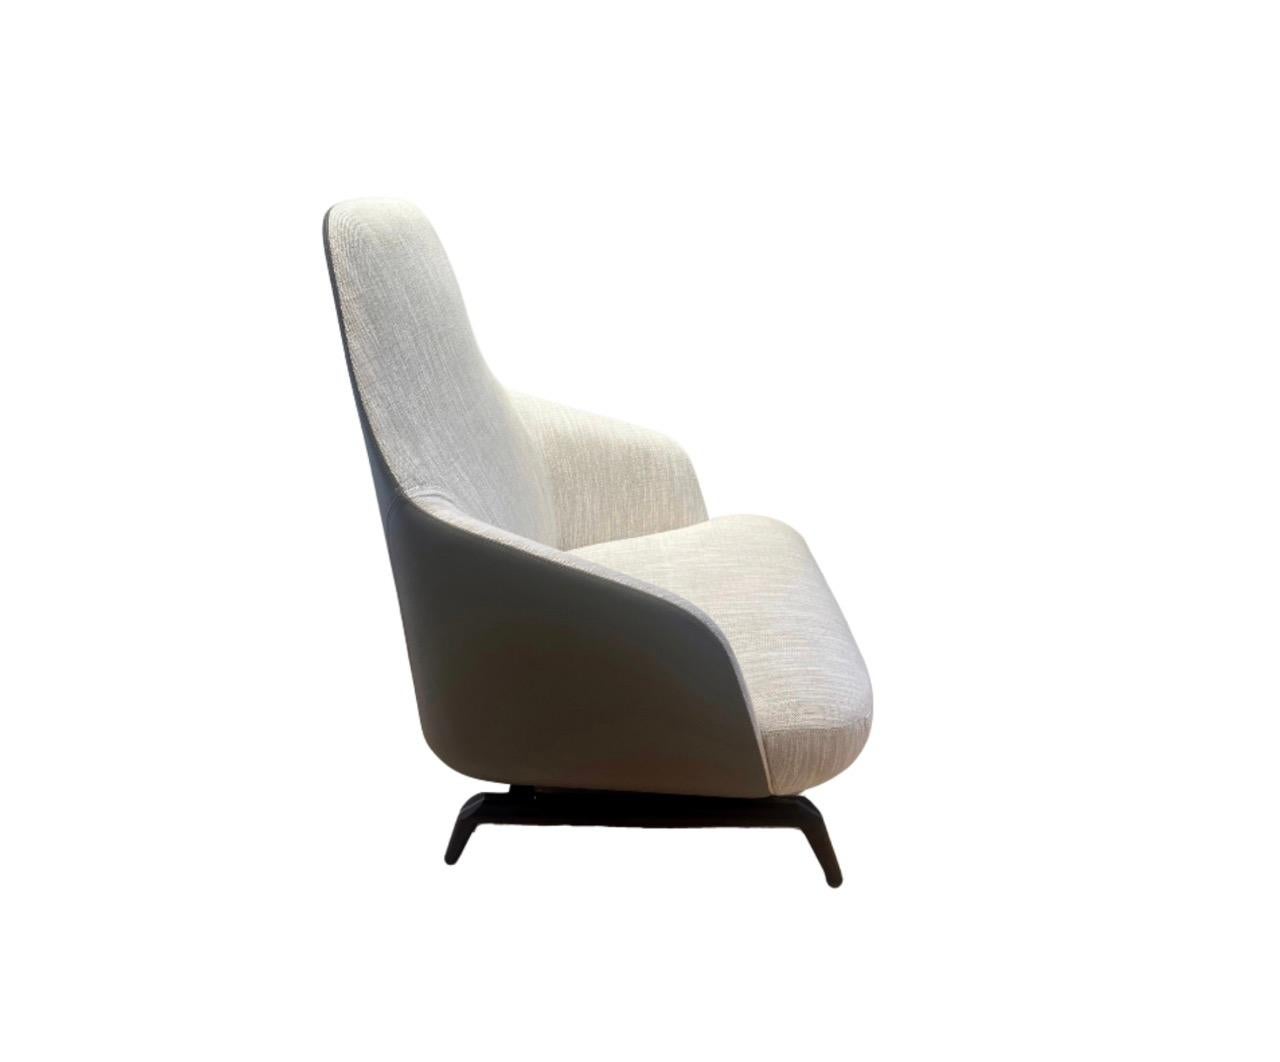 Designed by Umberto Asnago

Janet High Back Armchair 97828
-Inside in fabric cat. C Penny, 02 Sable
-Outside in pelle, 205
-Base in wood stained 2Z

This item is a floor sample. 